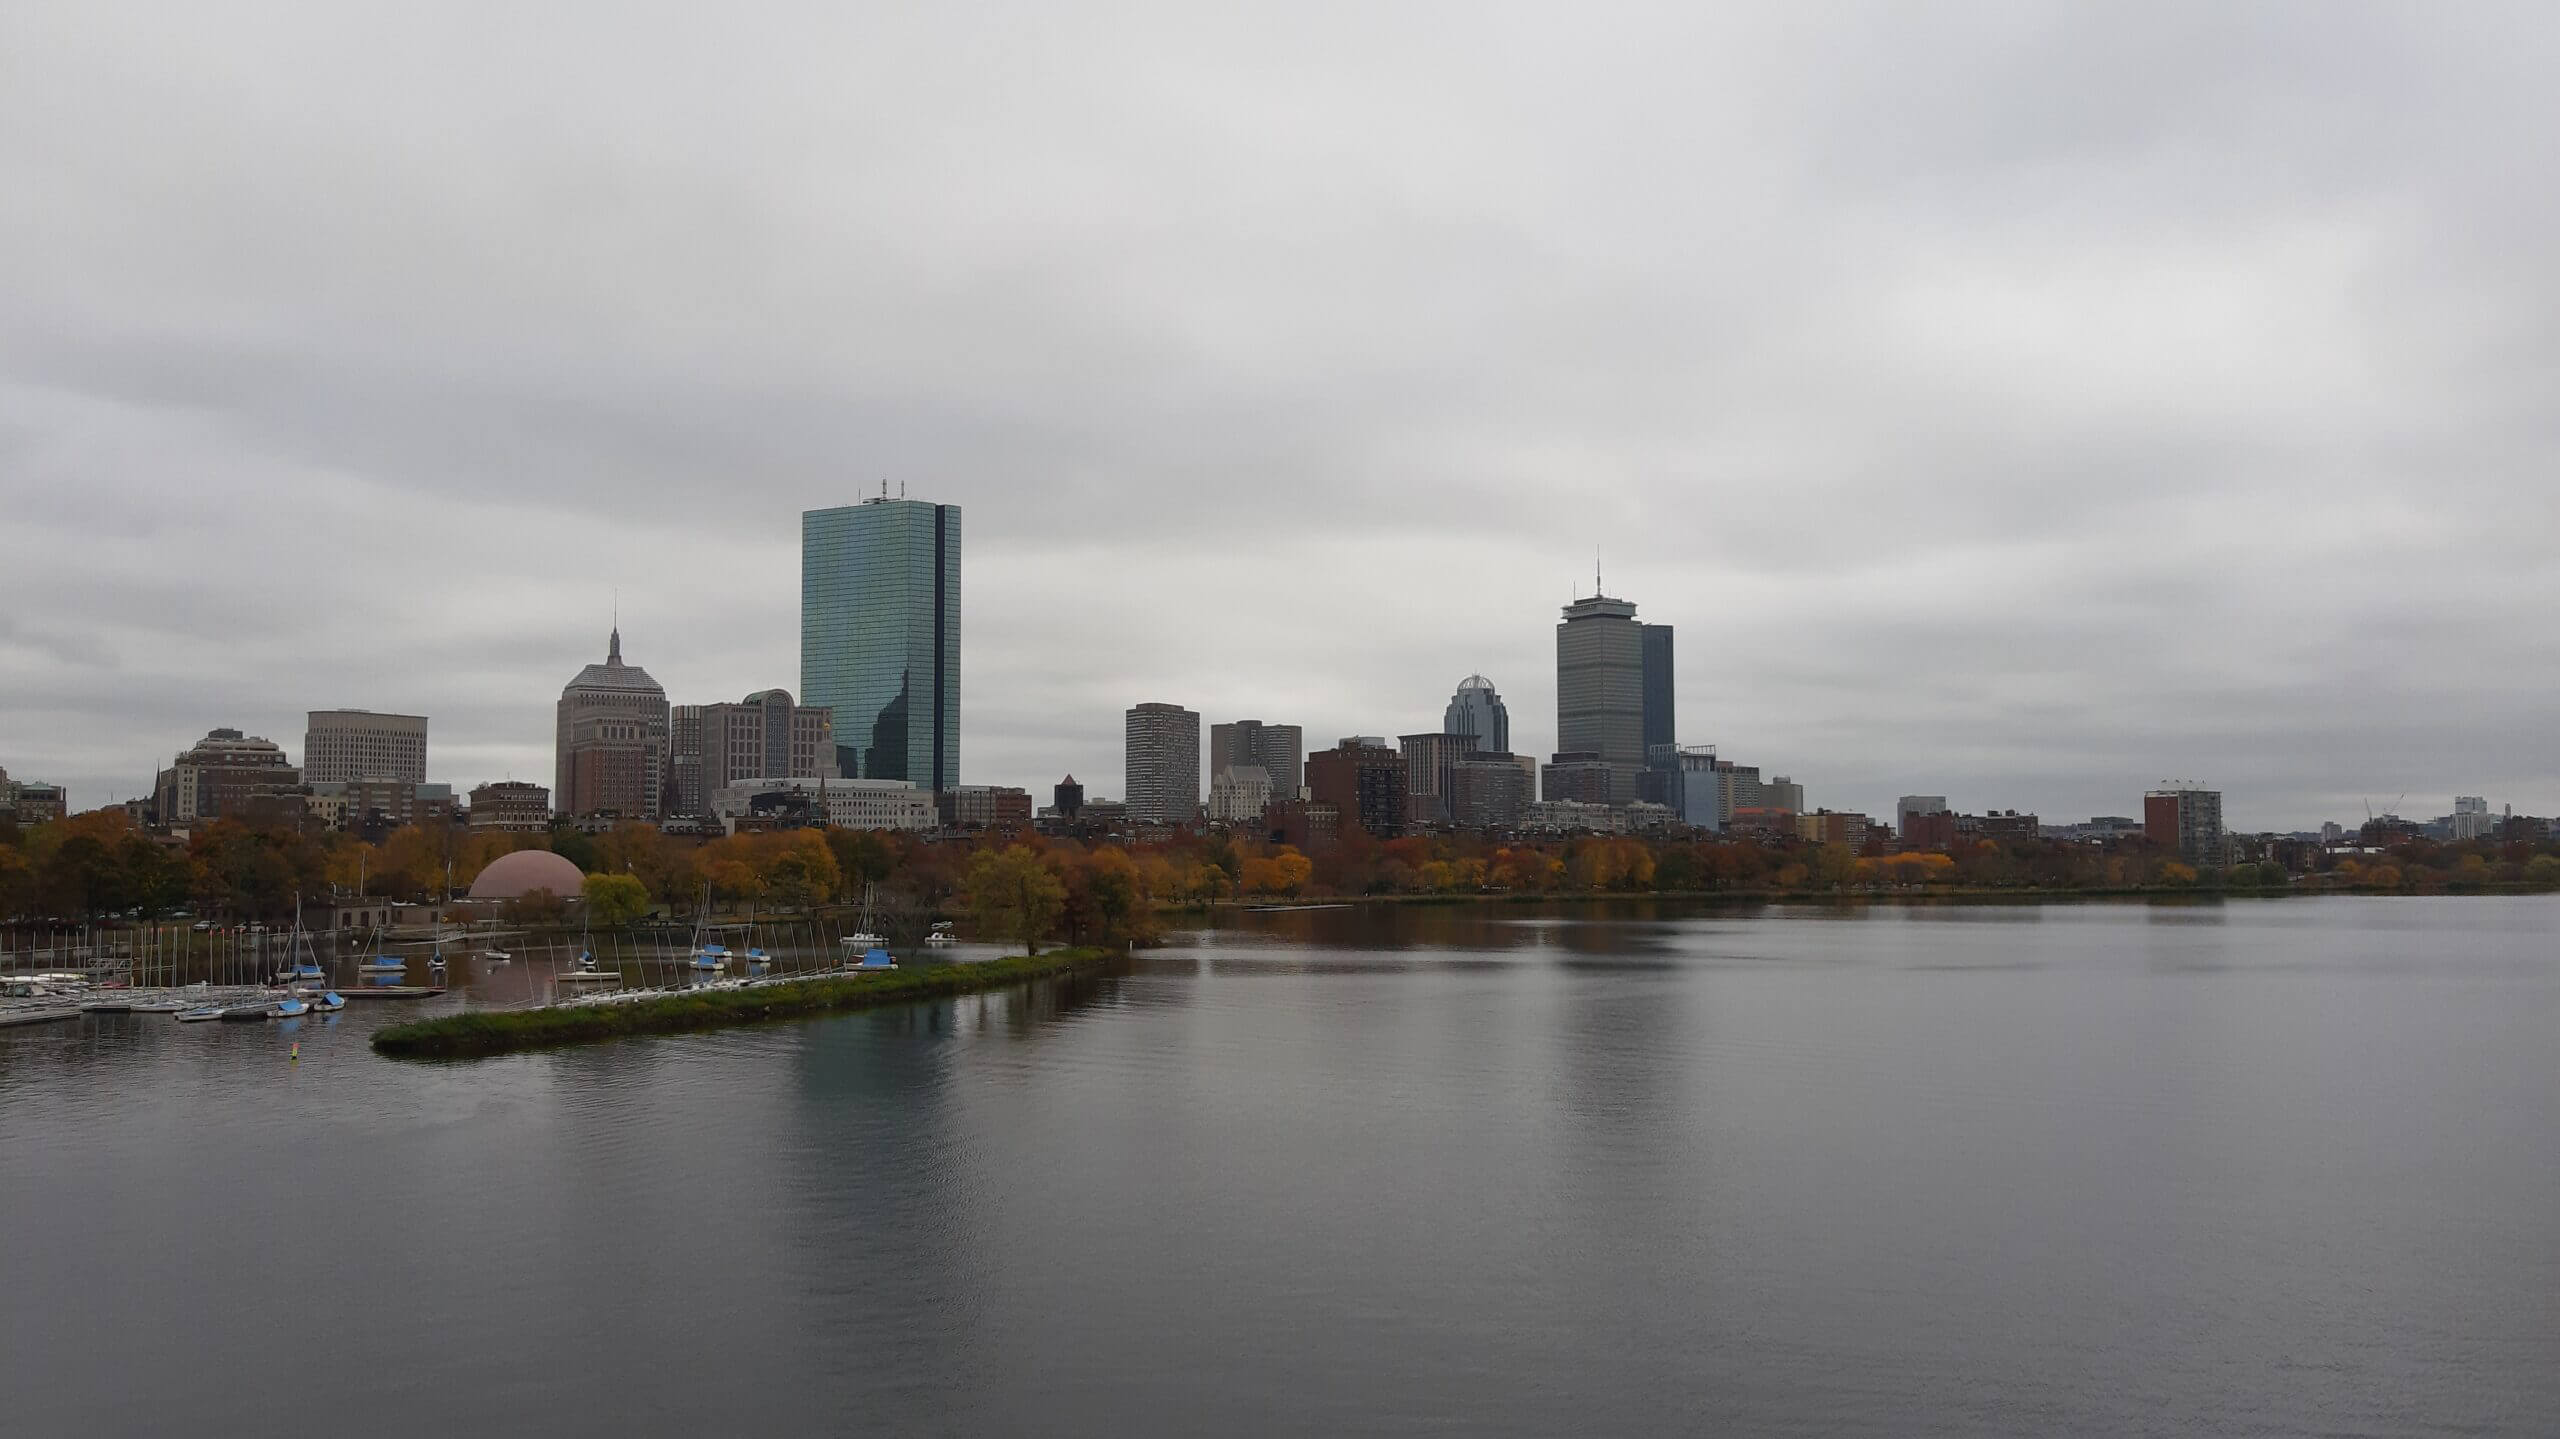 View of Boston from Cambridge